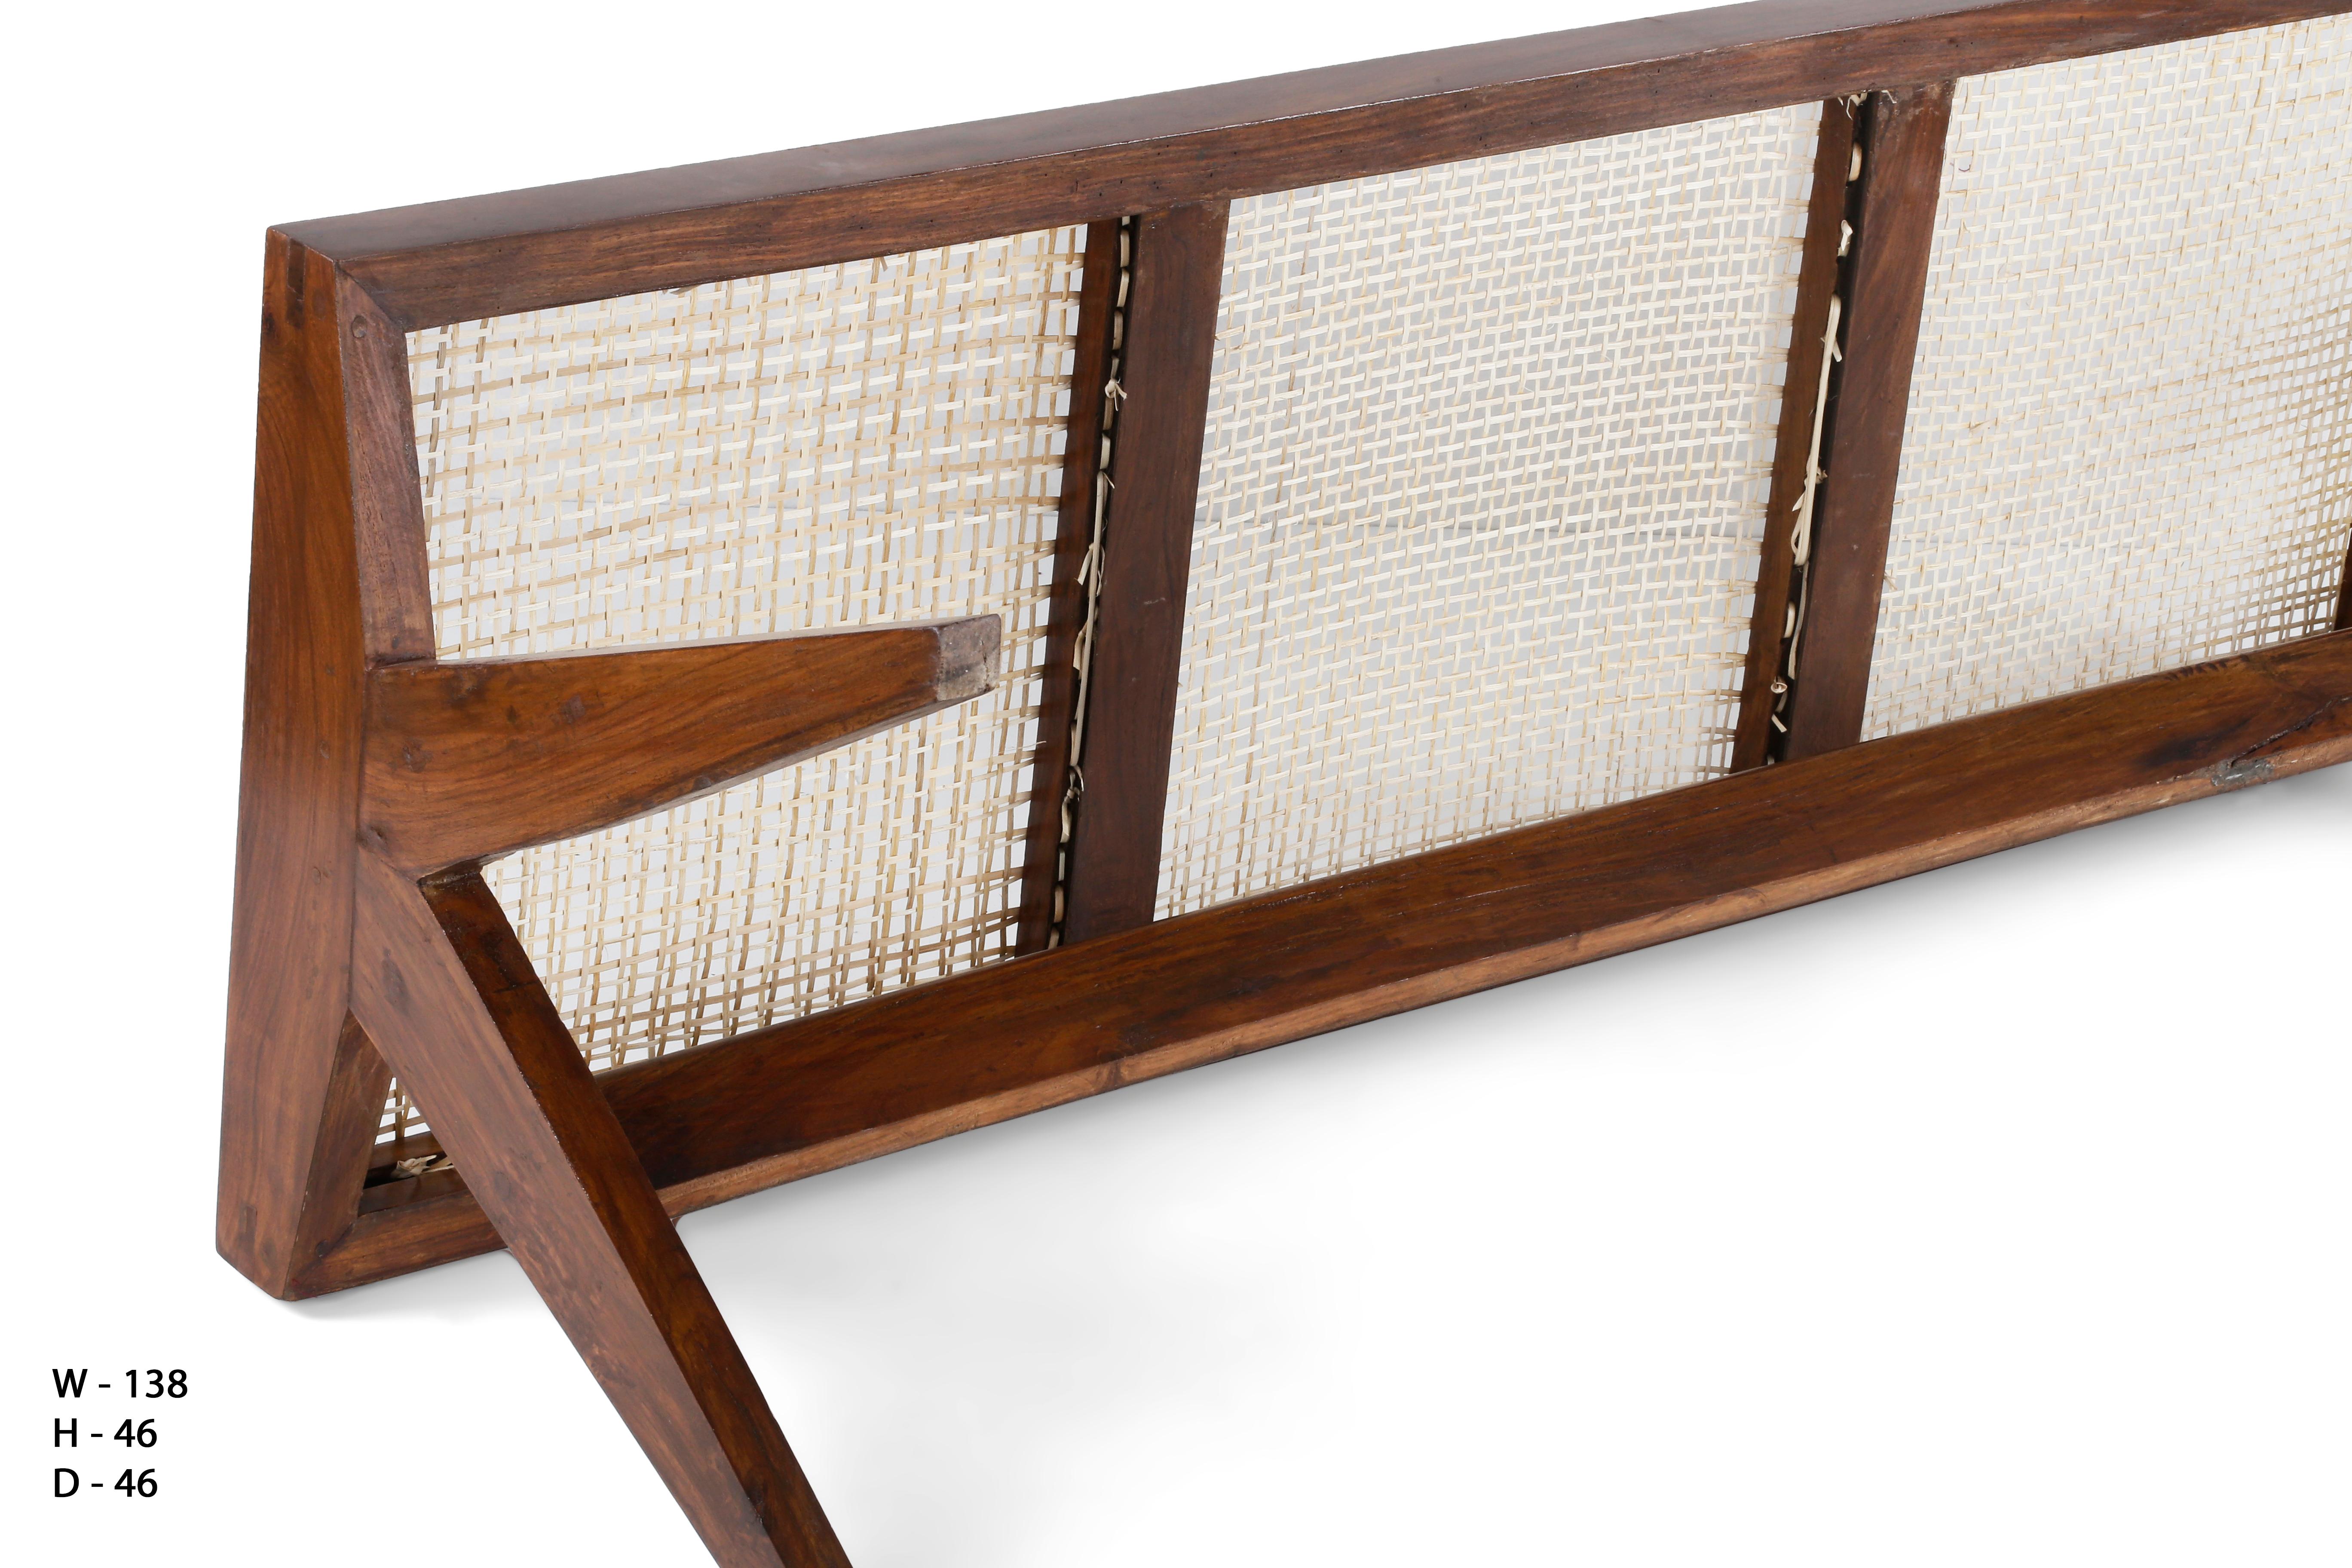 Mid-20th Century Pierre Jeanneret, Rare Chandigarh Caned Bench, PJ-SI-33-C